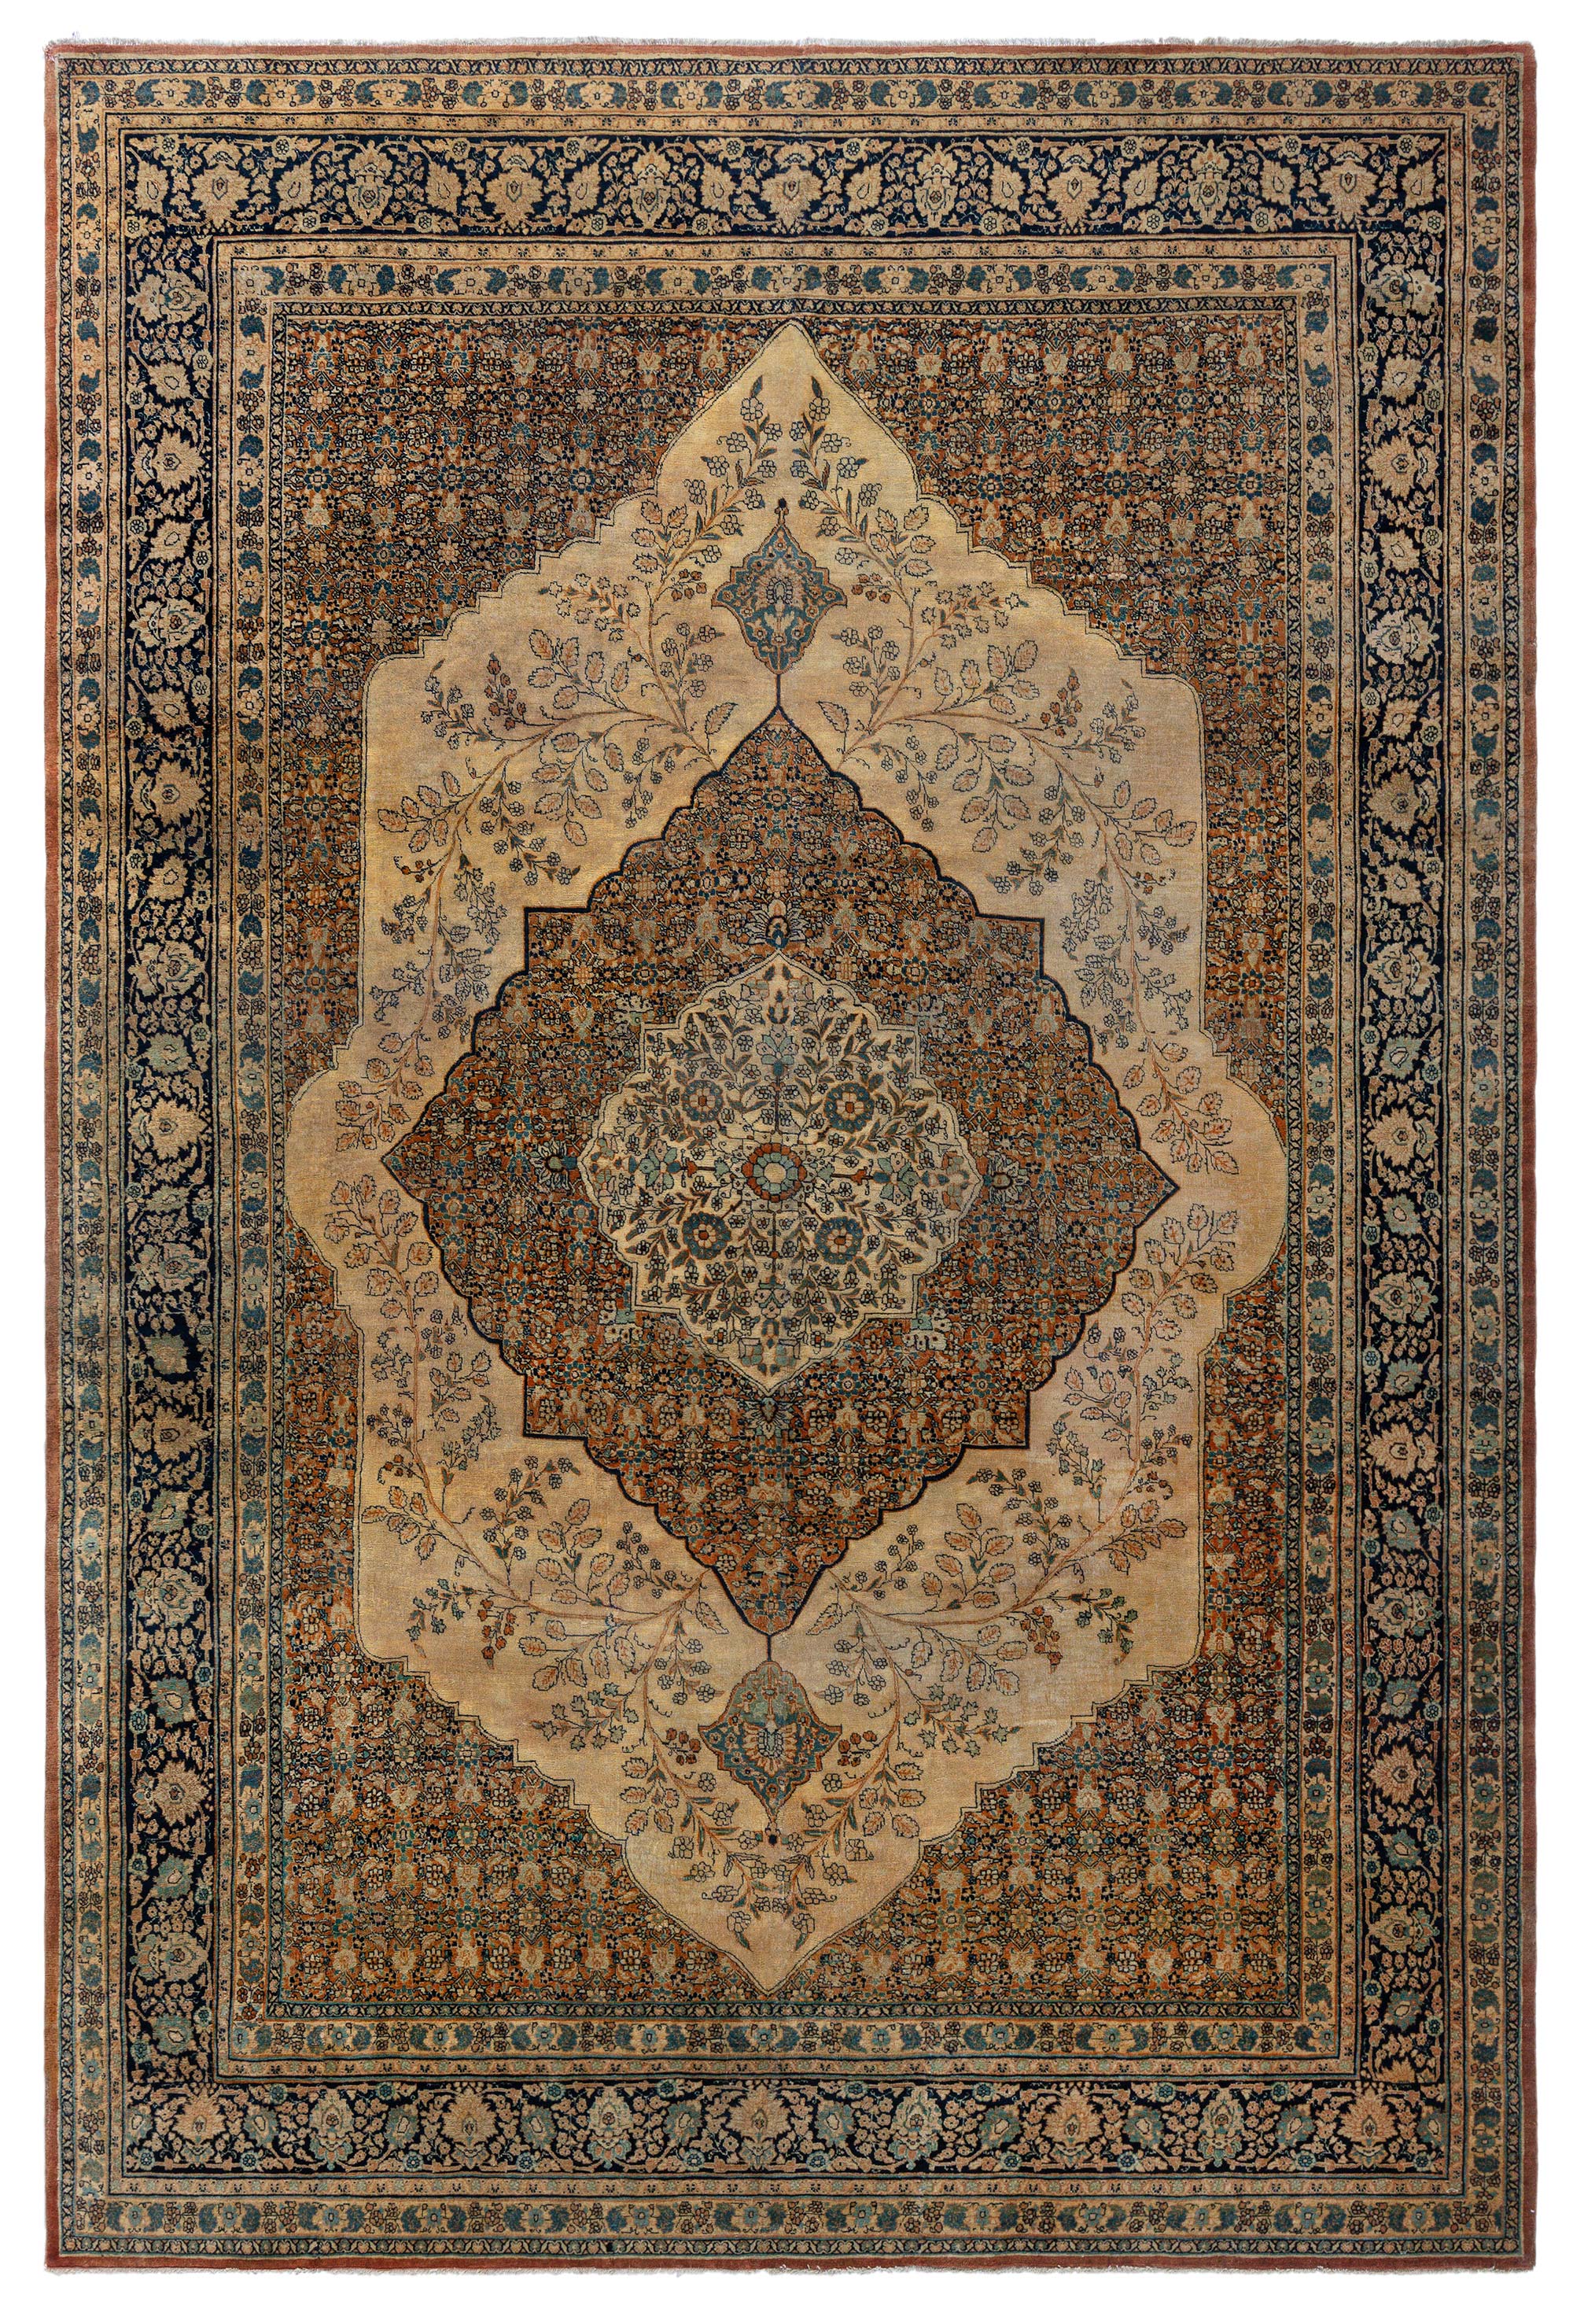 19th Century Persian Tabriz Hand Knotted Wool Rug